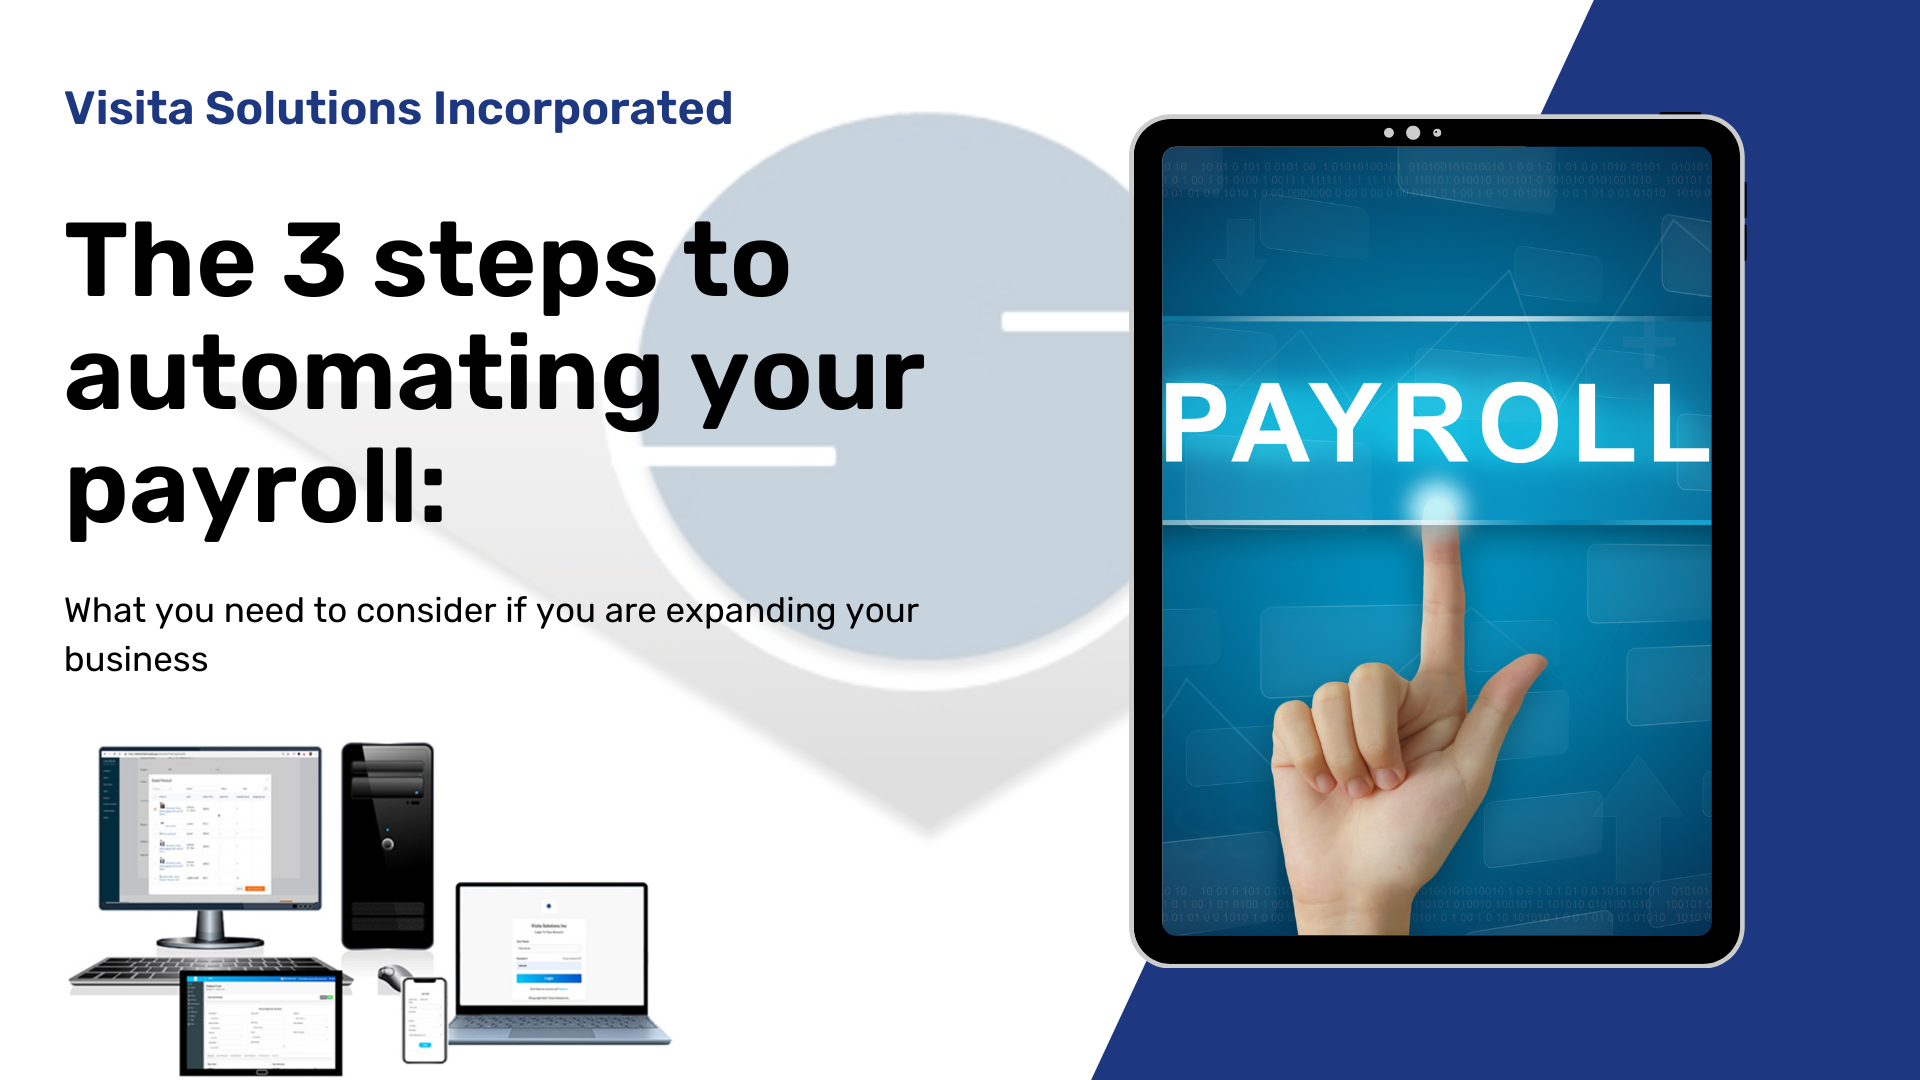 The 3 steps to automating your payroll: What you need to consider if you are expanding your business